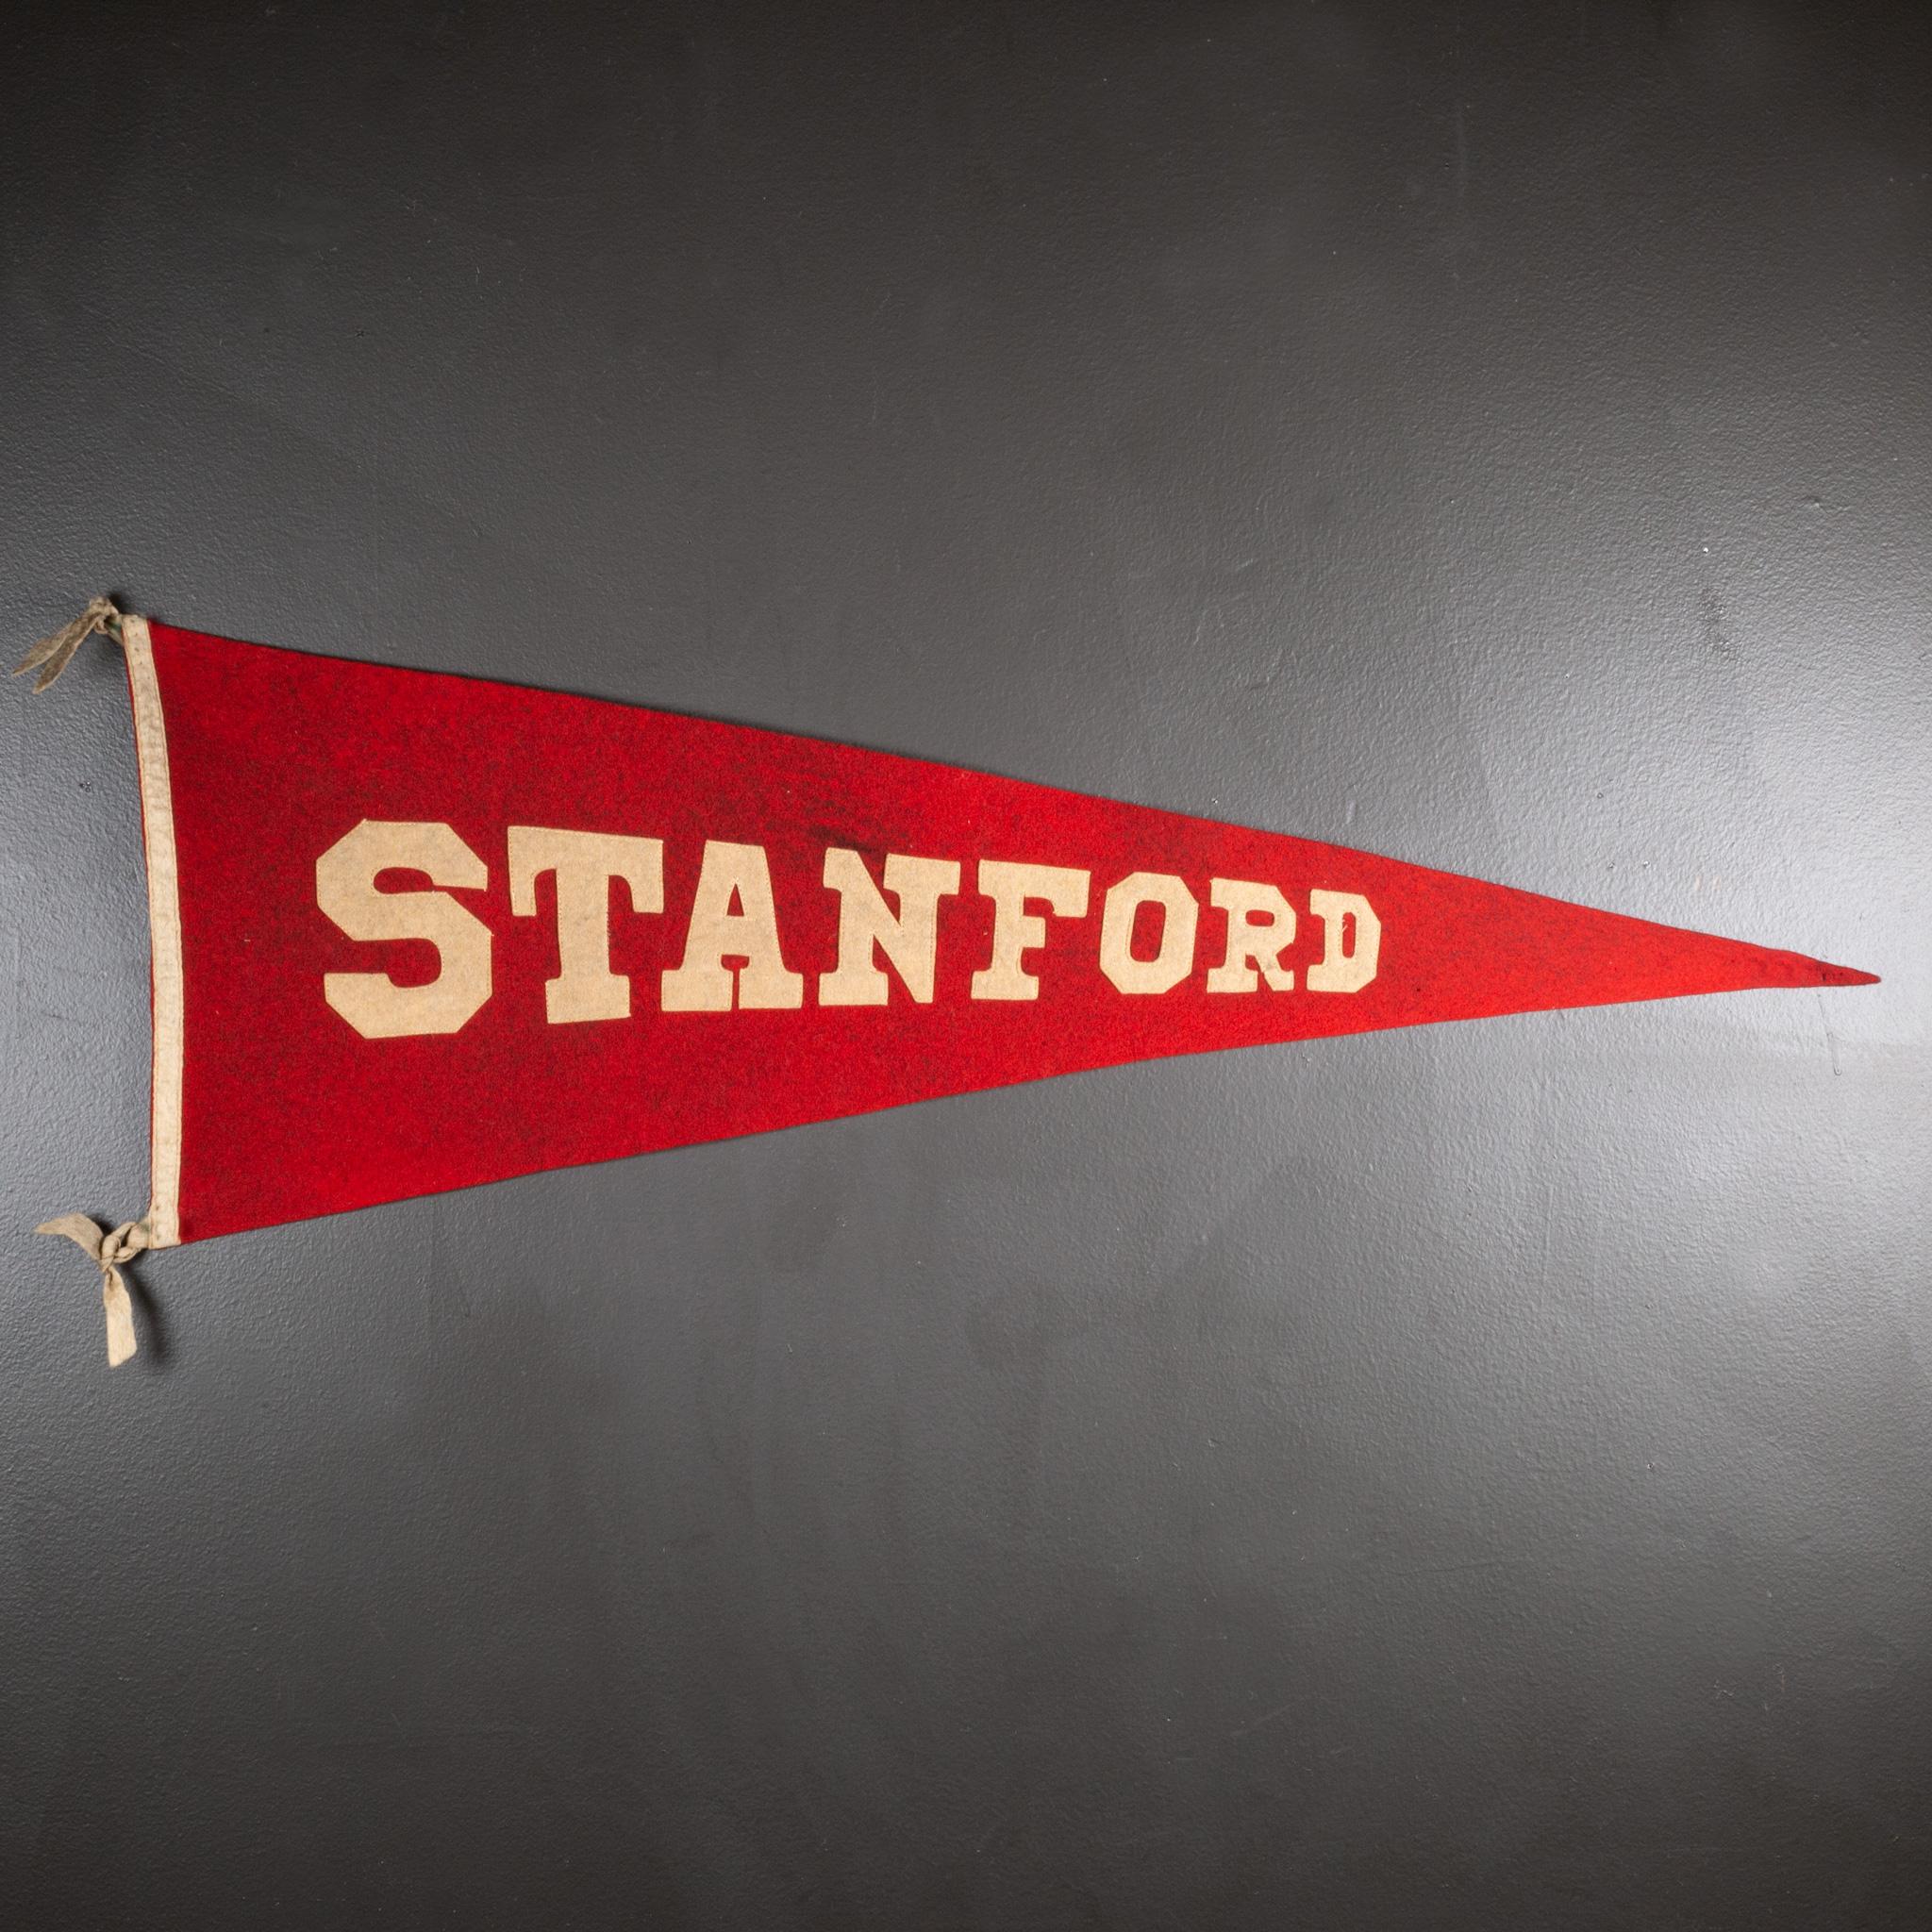 Industrial Standford University Pennant Banner, circa 1920-1940